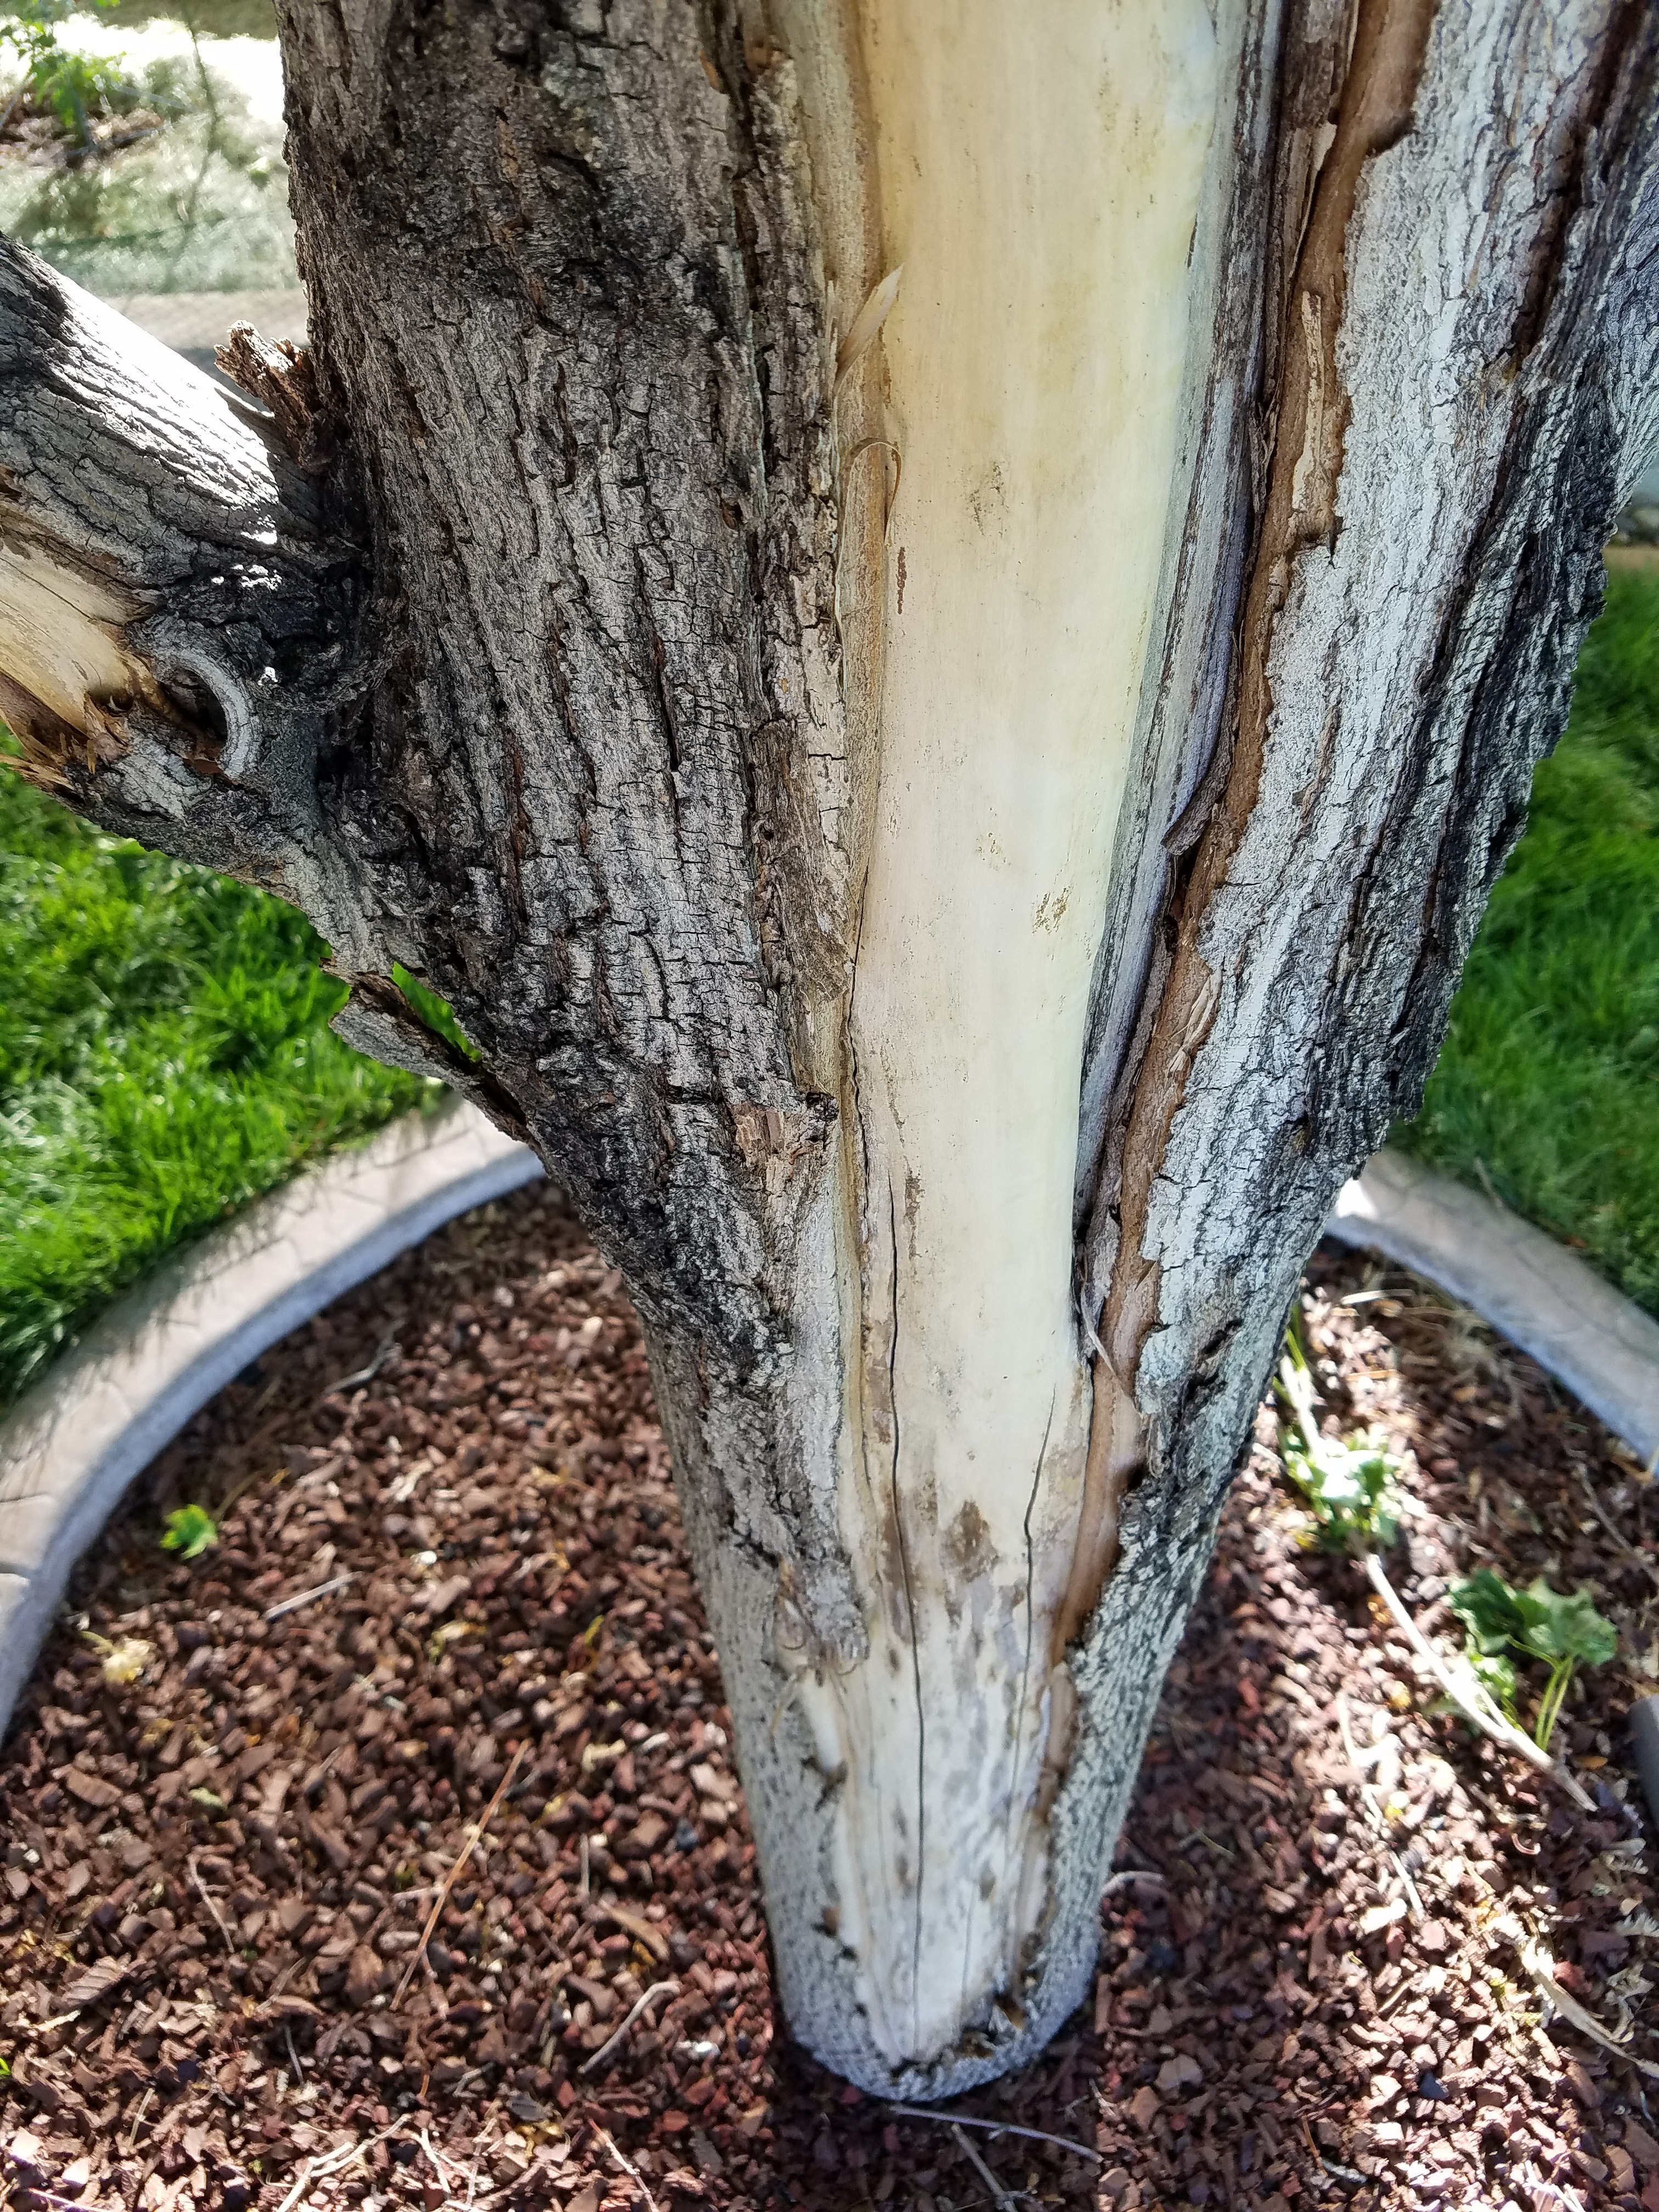 Norway Maples Losing Bark On Trunks And Some Branches And Having Some Dead Branches Ask Extension